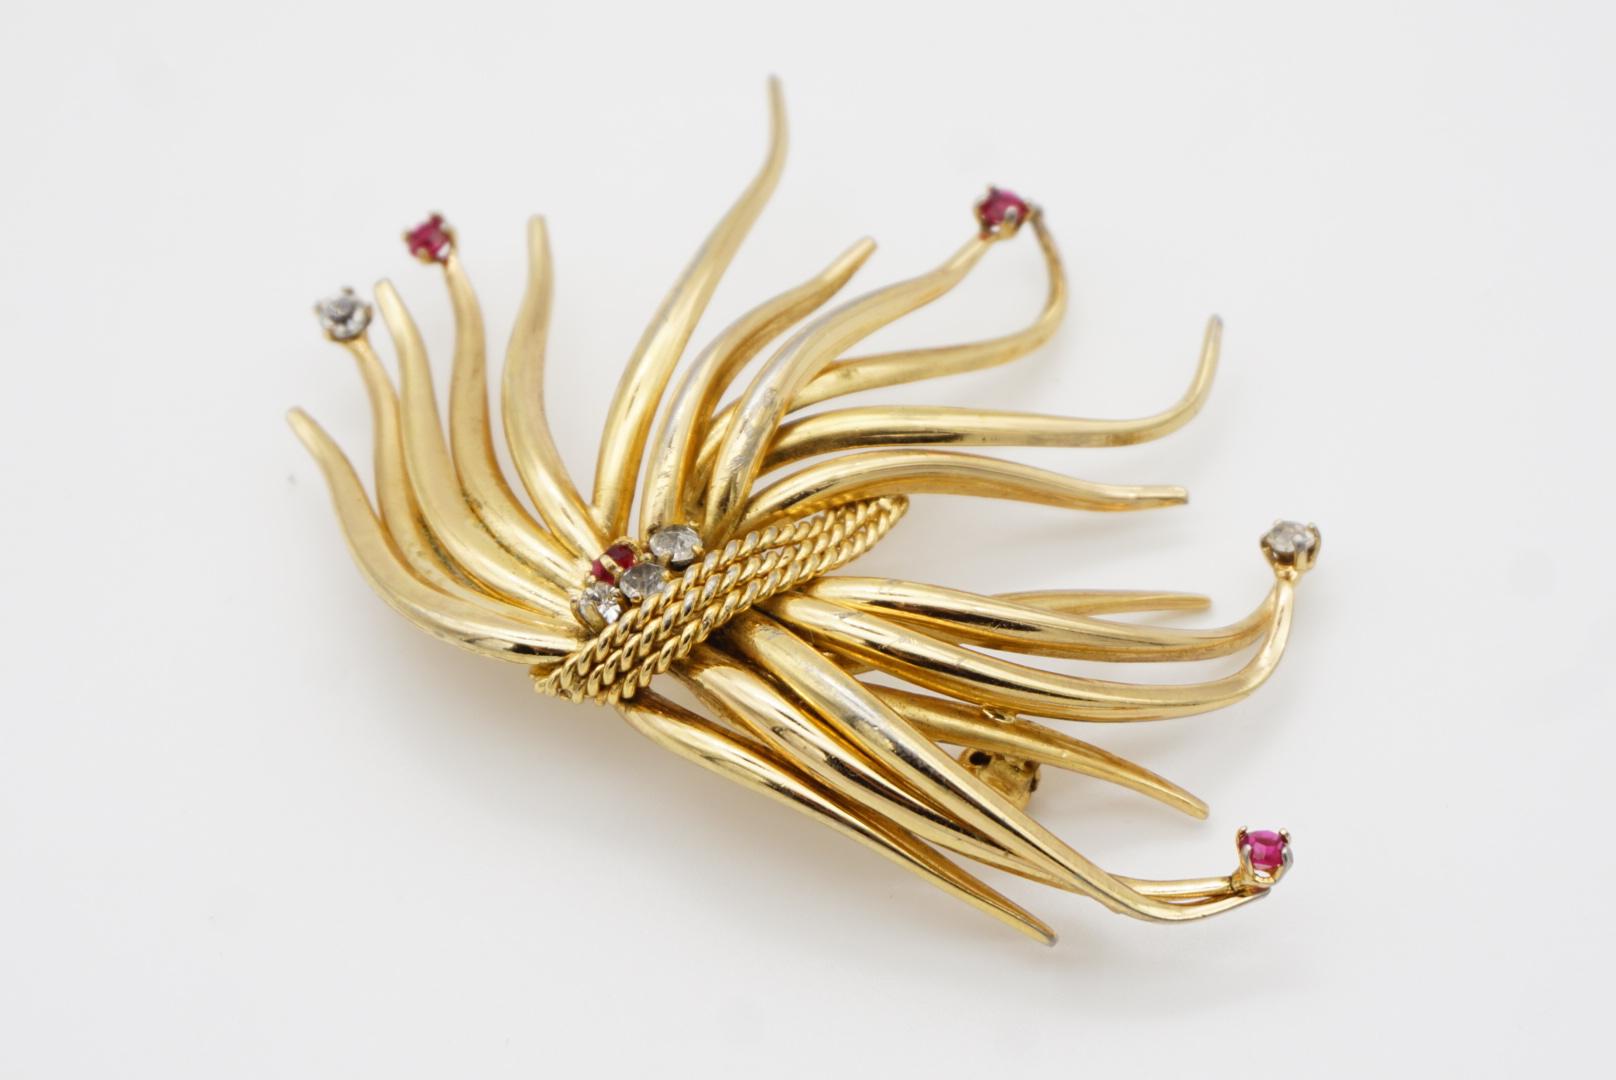 Christian Dior GROSSE 1962 Vintage Large Intertwined Flower Ruby Crystals Brooch For Sale 4